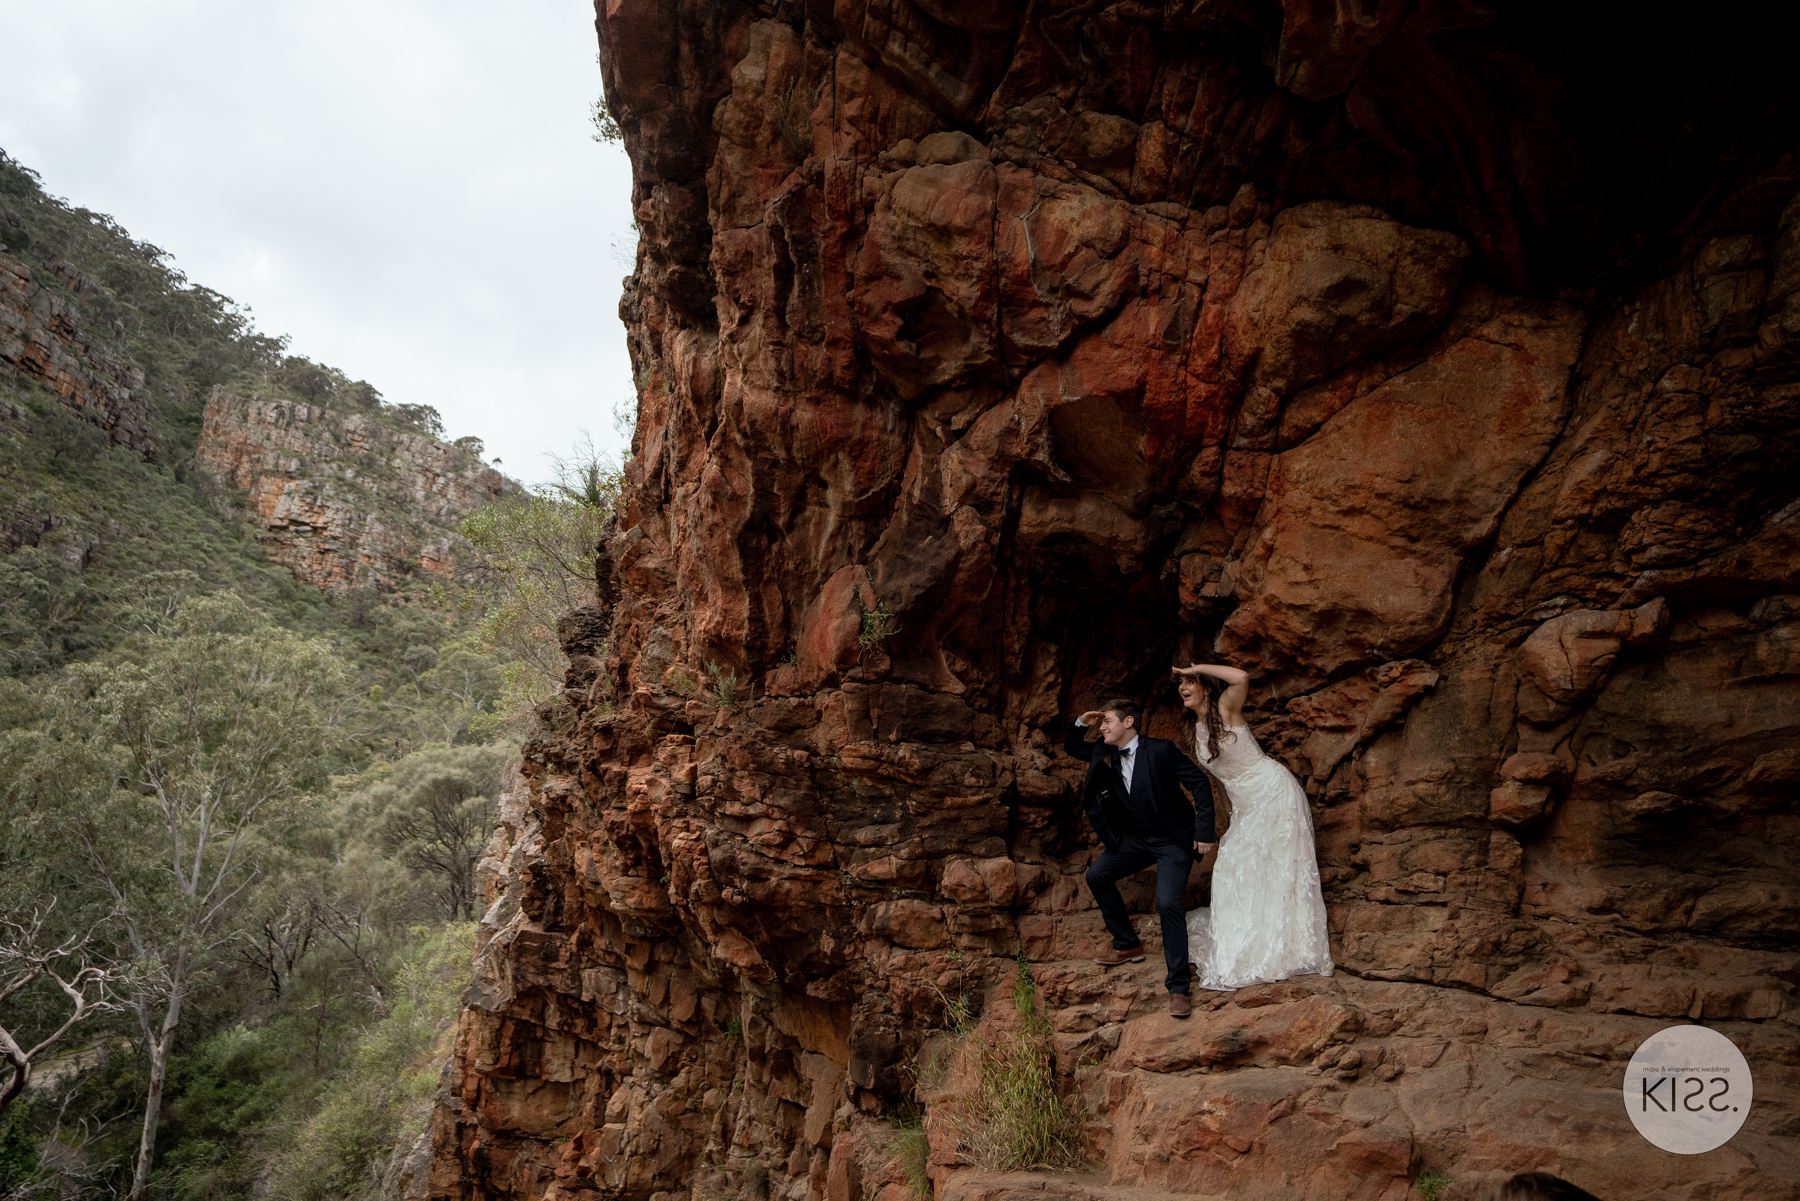 Welcome to our KISS Package Wedding Planner, specializing in micro and elopement weddings in South Australia. We're excited to help you create unforgettable memories for your special day!